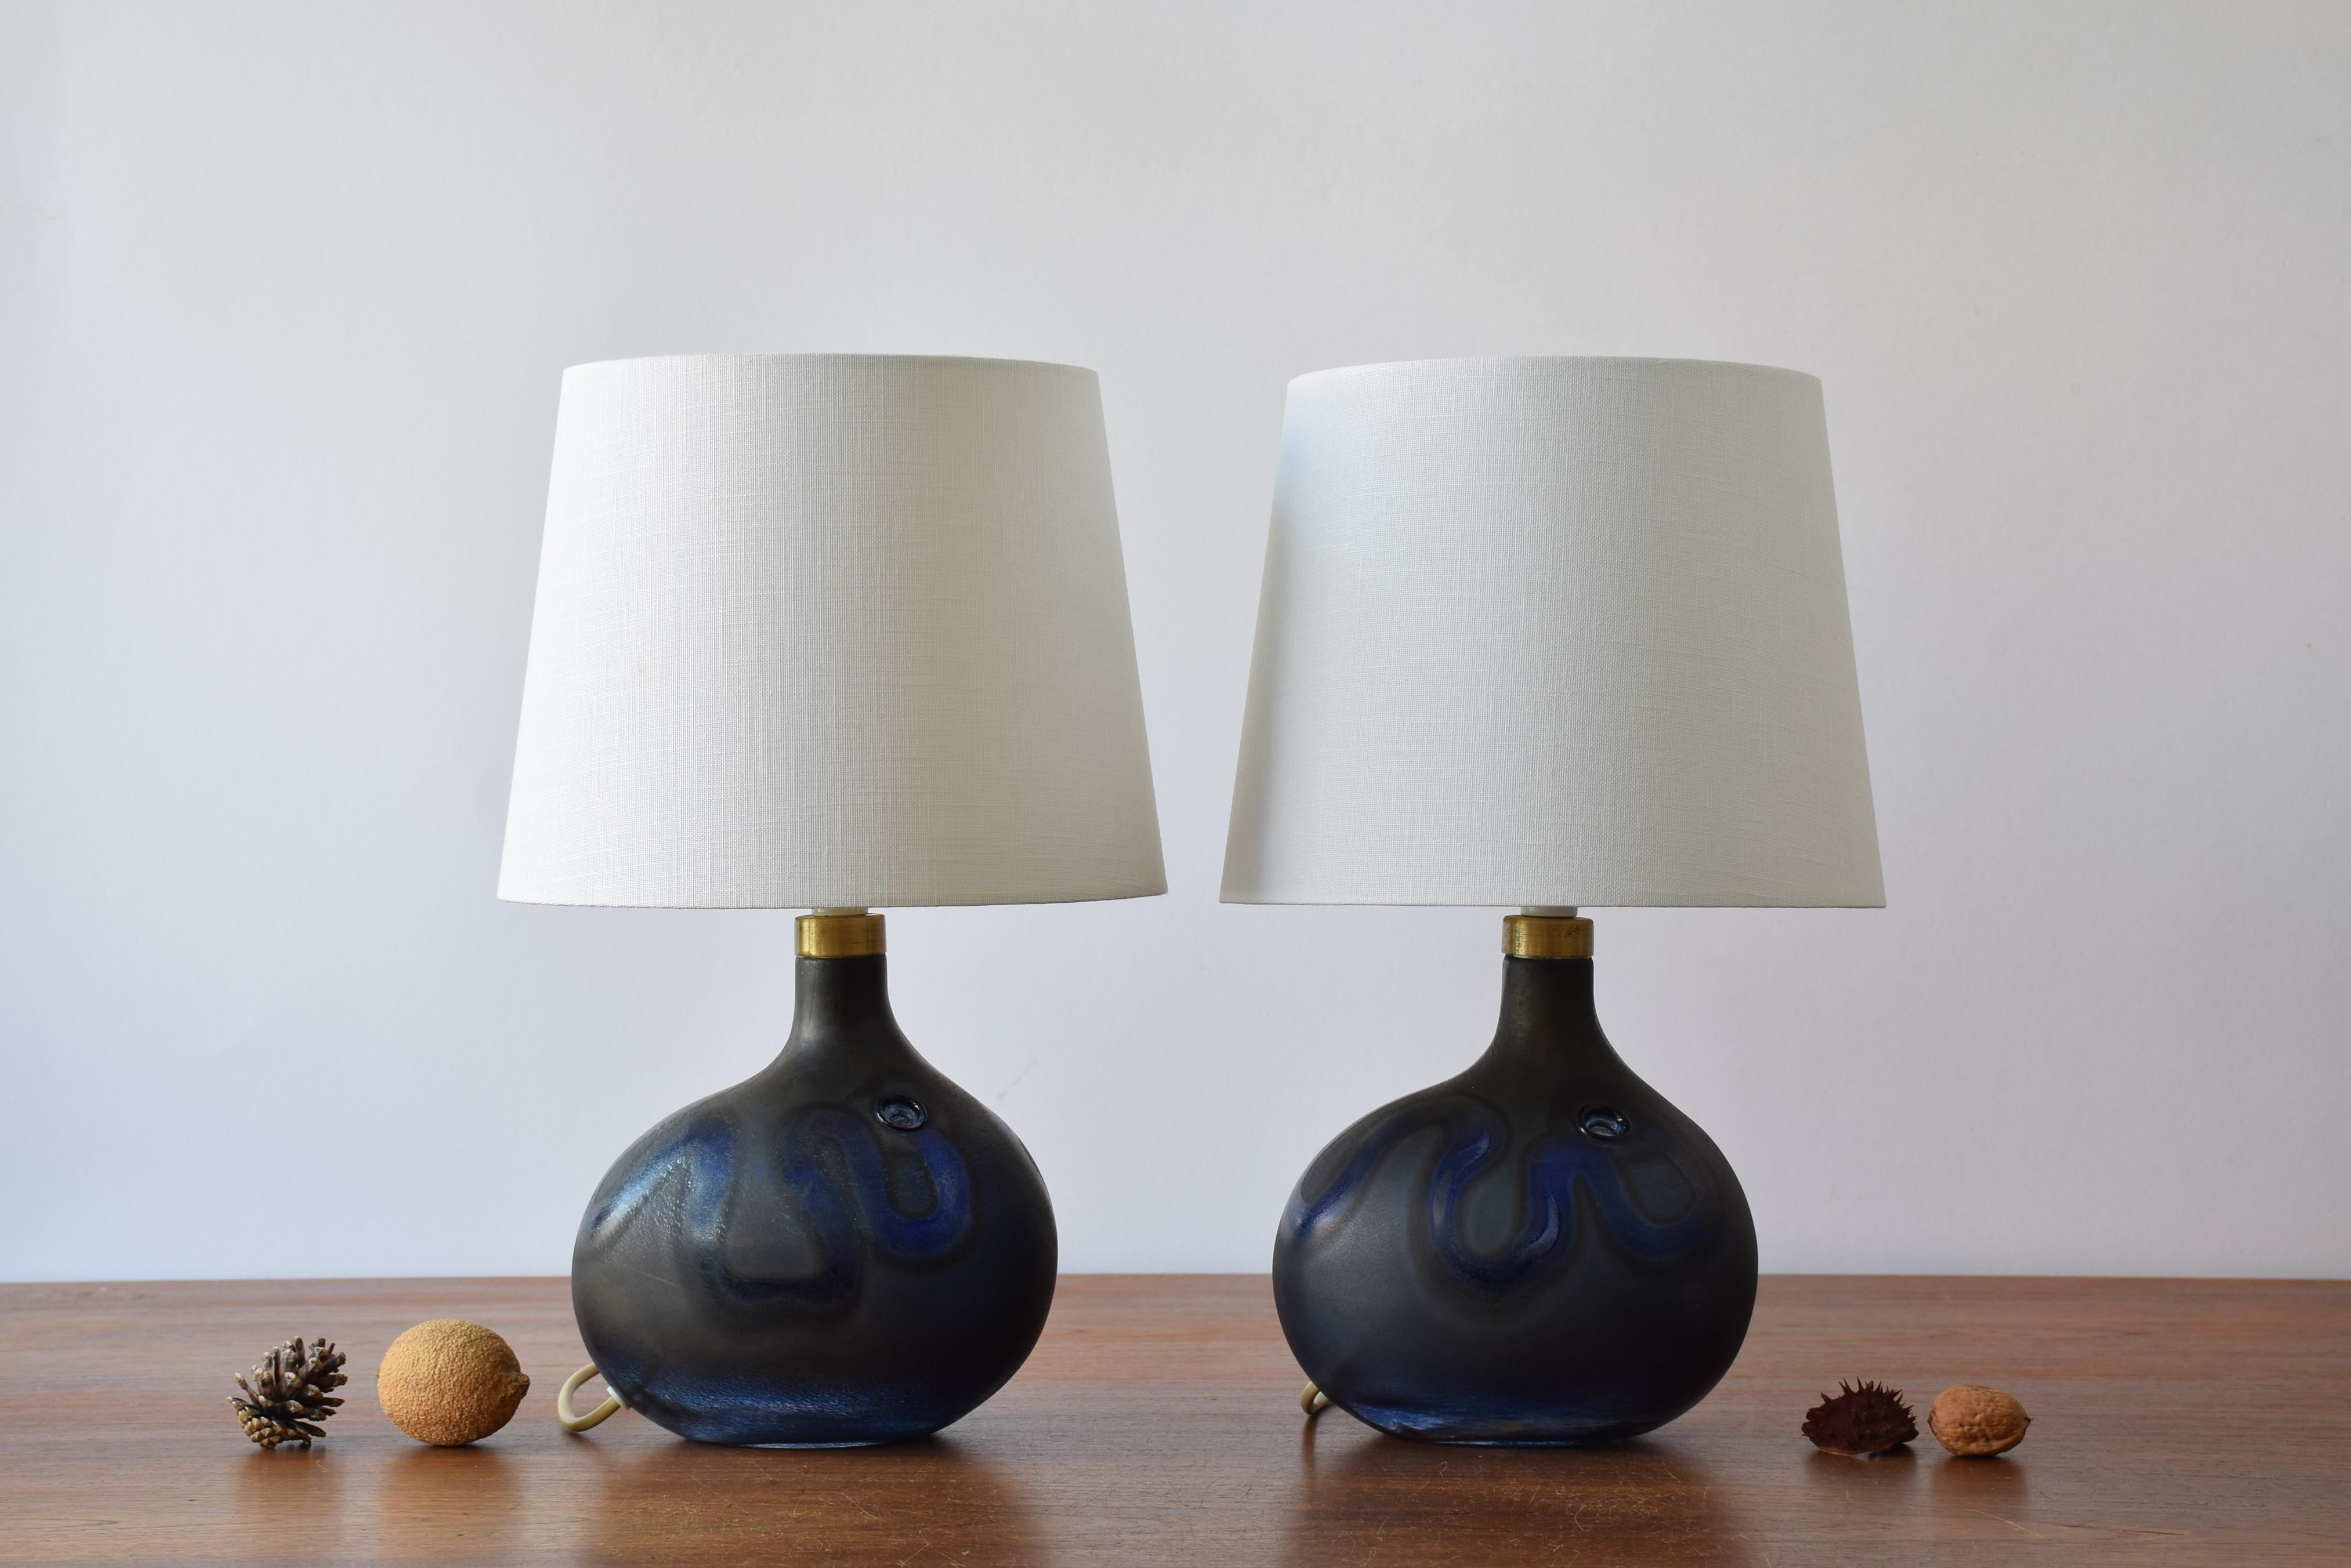 Pair of midcentury Danish sculptural hand blown glass lamps designed by Michael Bang and made by Holmegaard. They were only in production shortly from 1973-1976.

The lamps have a matte blue grey surface with a polished glass ribbon and a hole